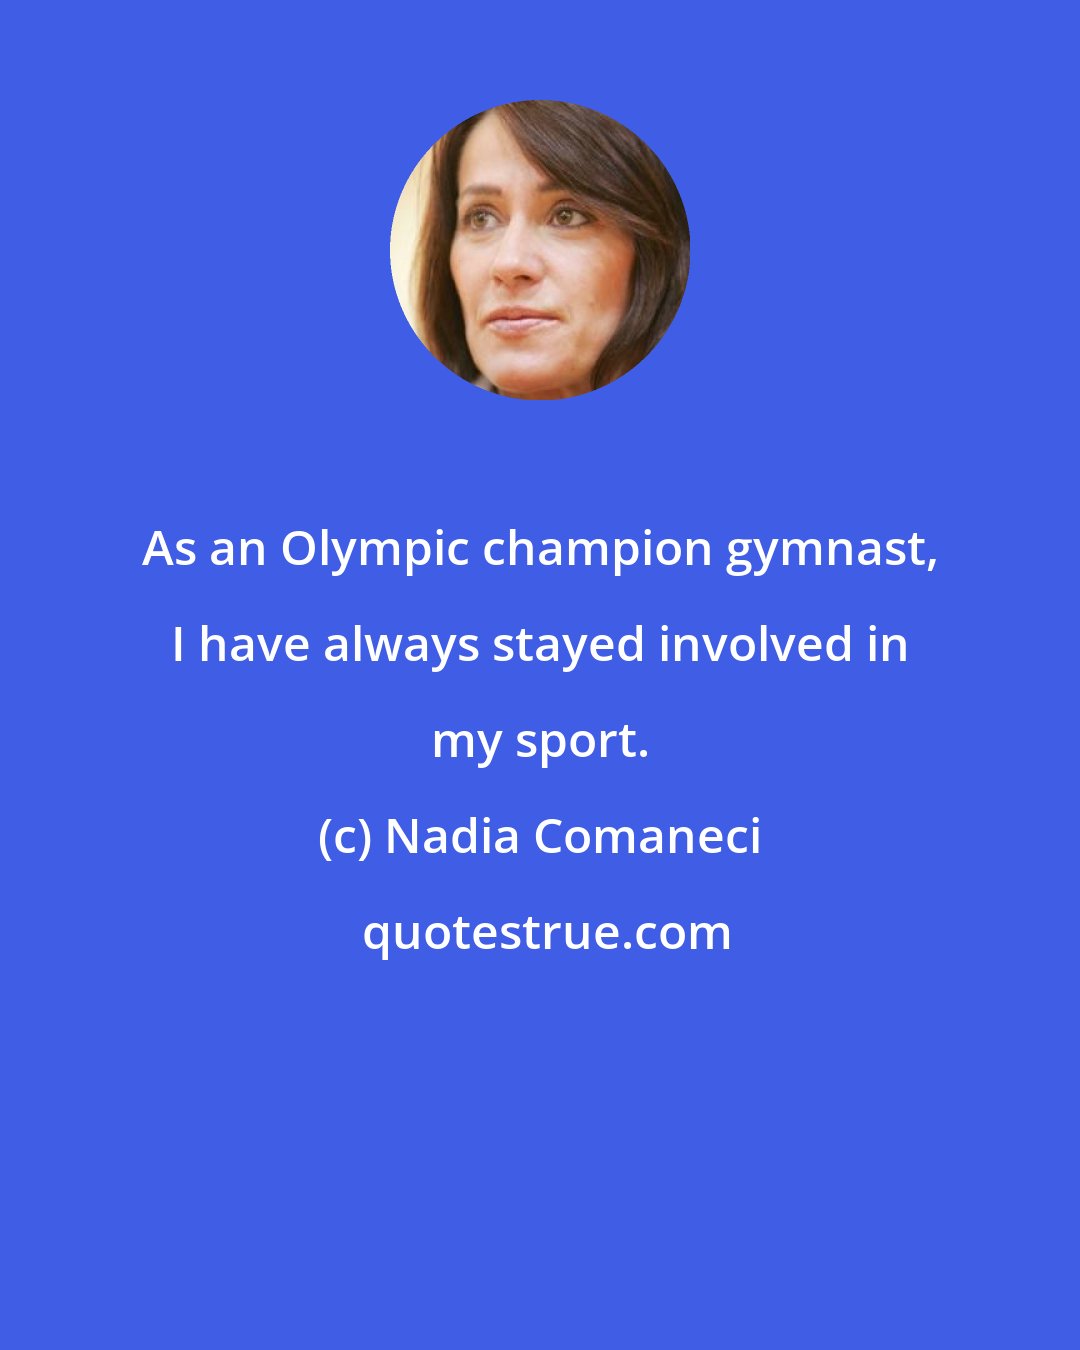 Nadia Comaneci: As an Olympic champion gymnast, I have always stayed involved in my sport.